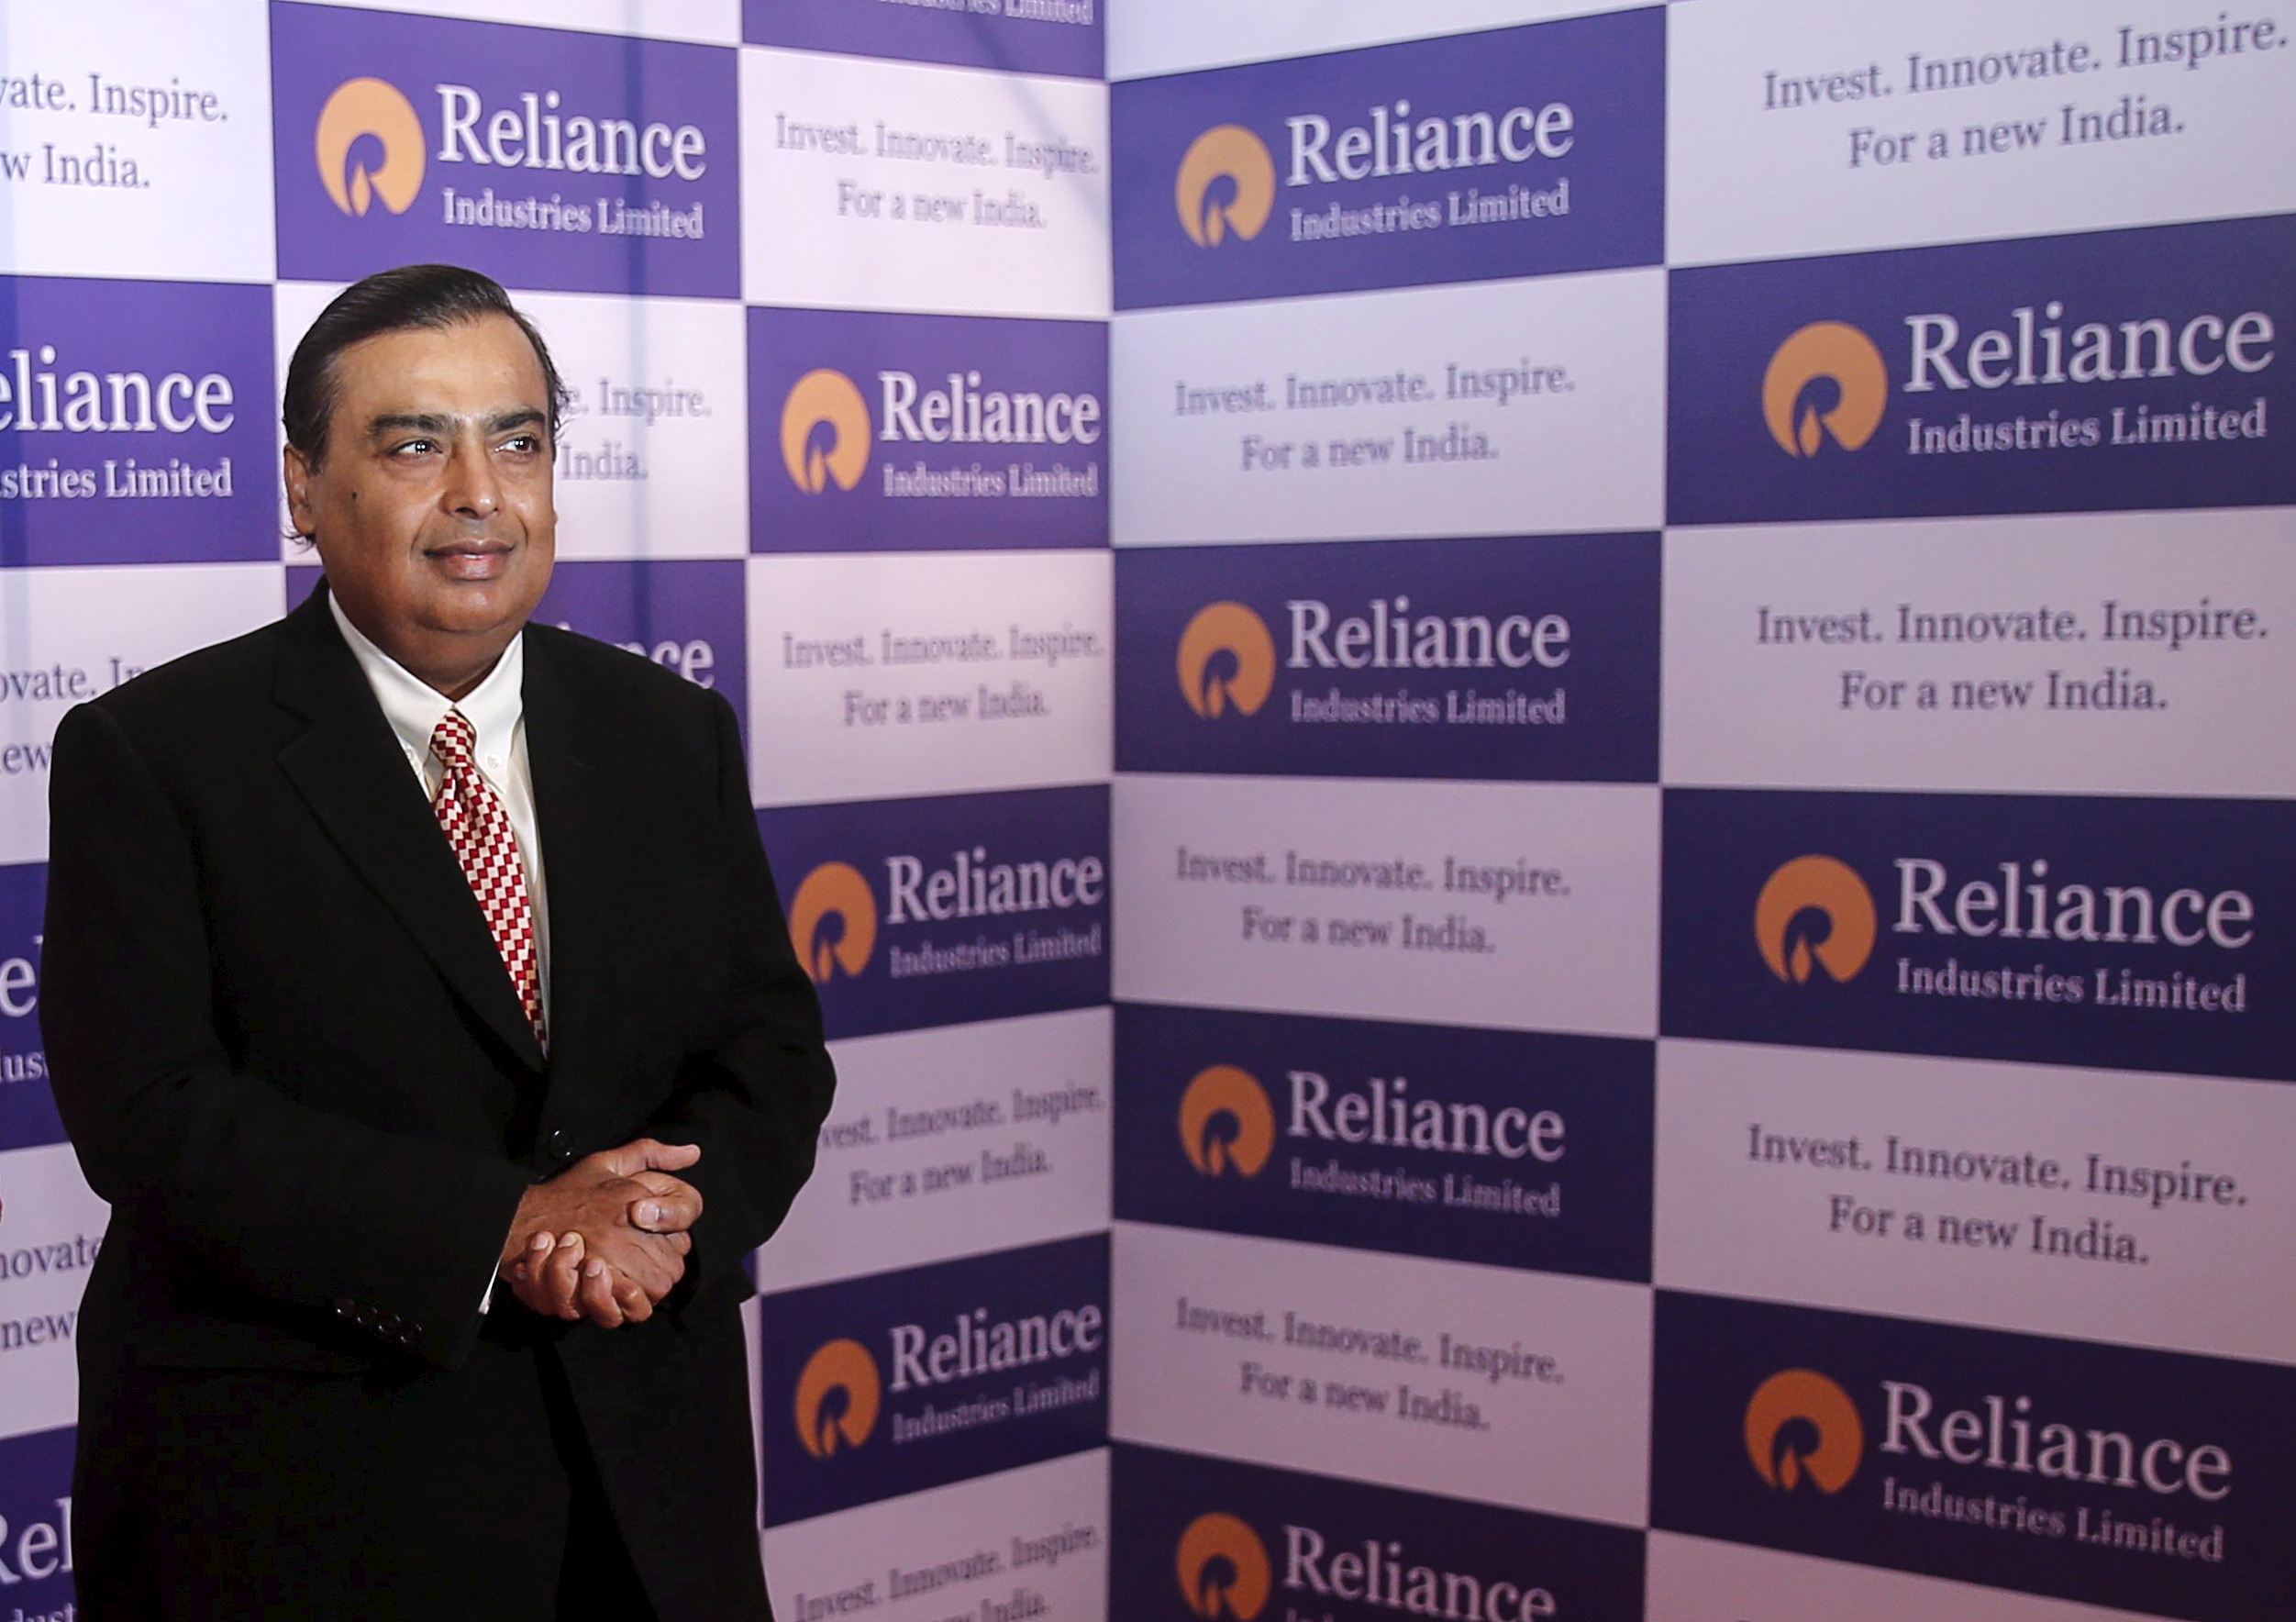 india's reliance industries and chairman fined over share trades | reuters